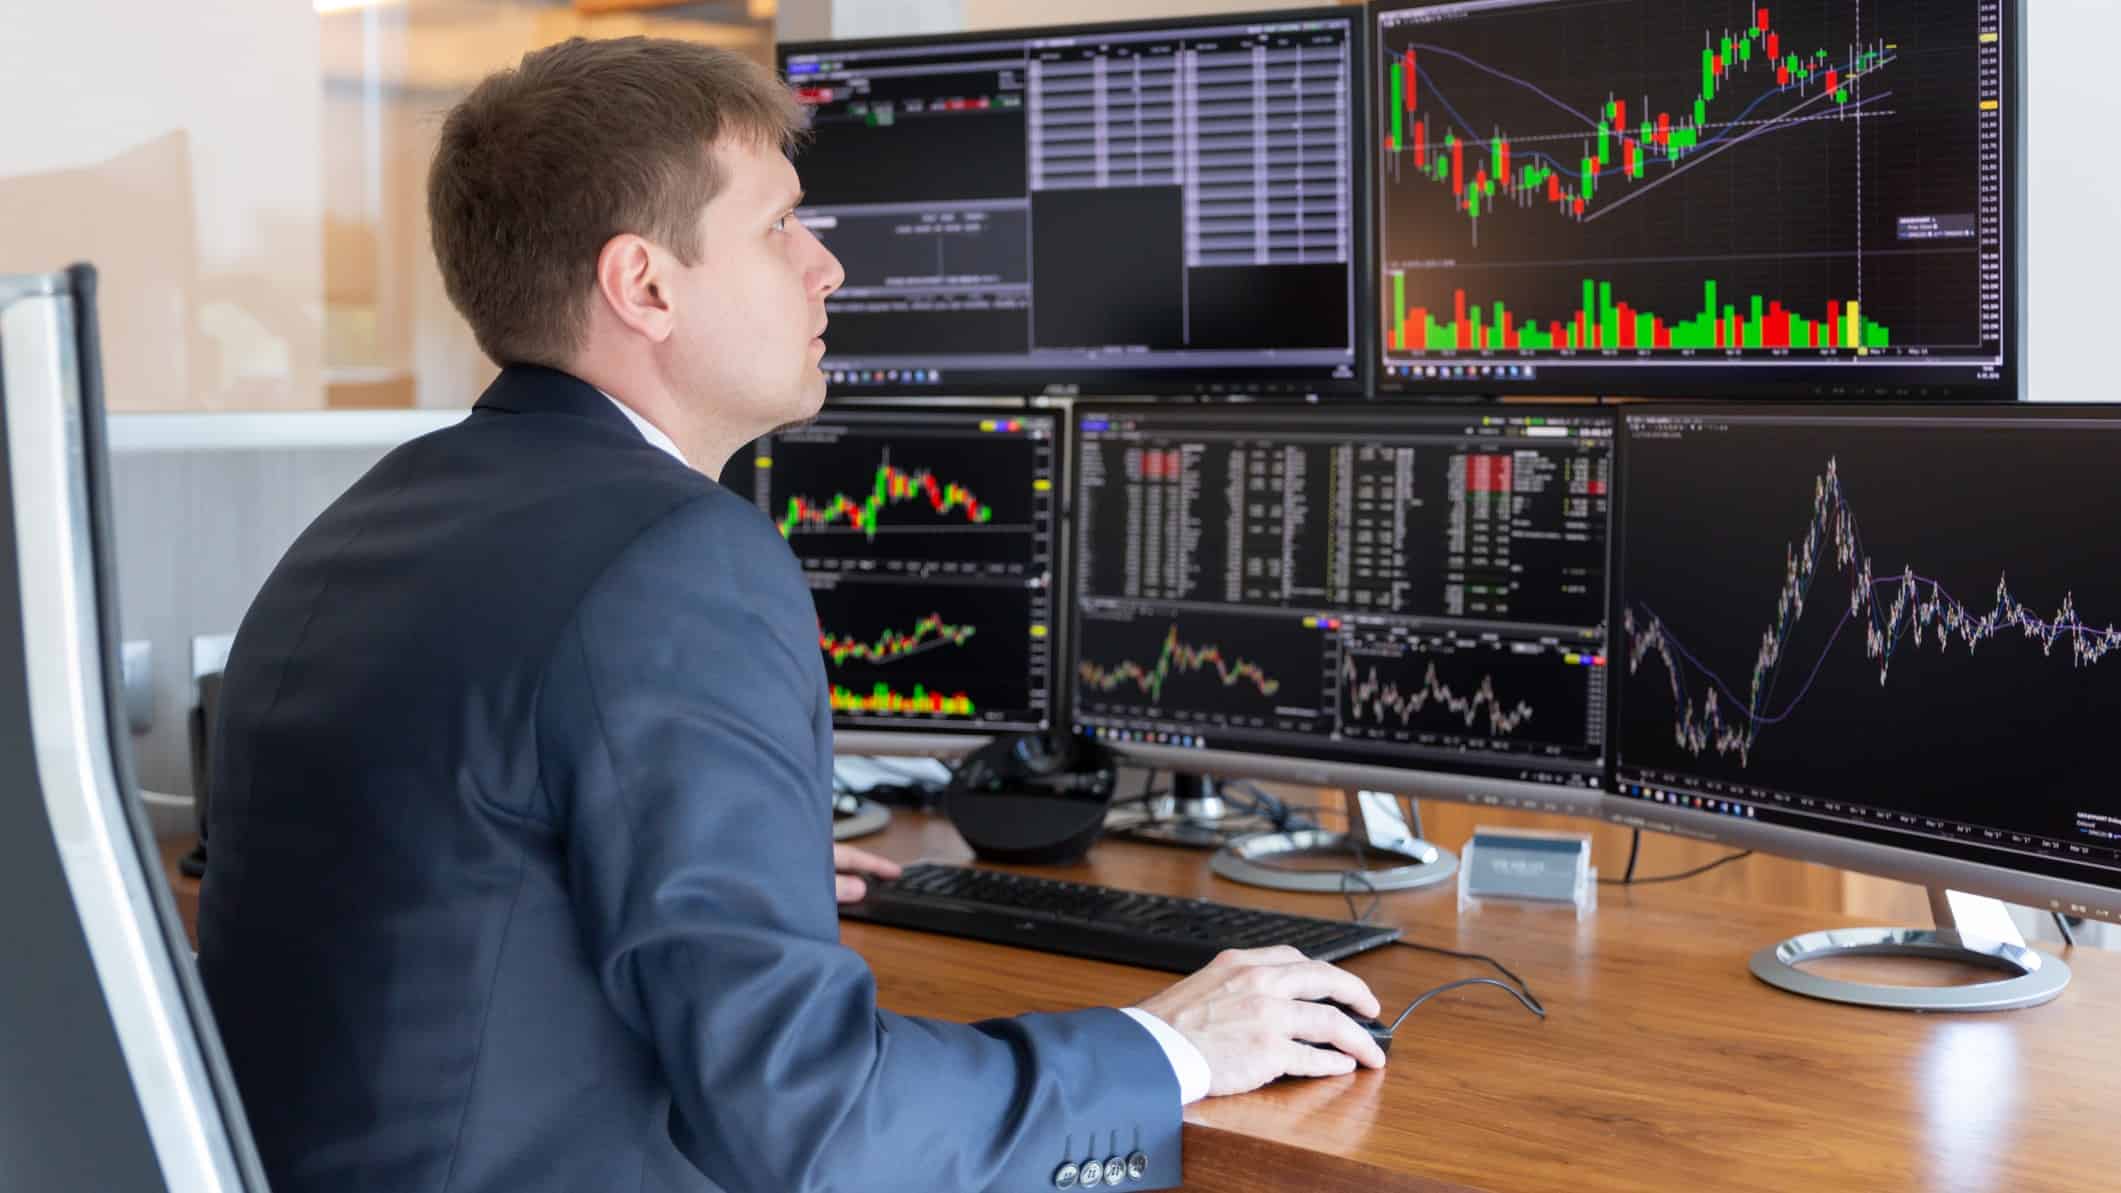 Broker working with share prices on computers.